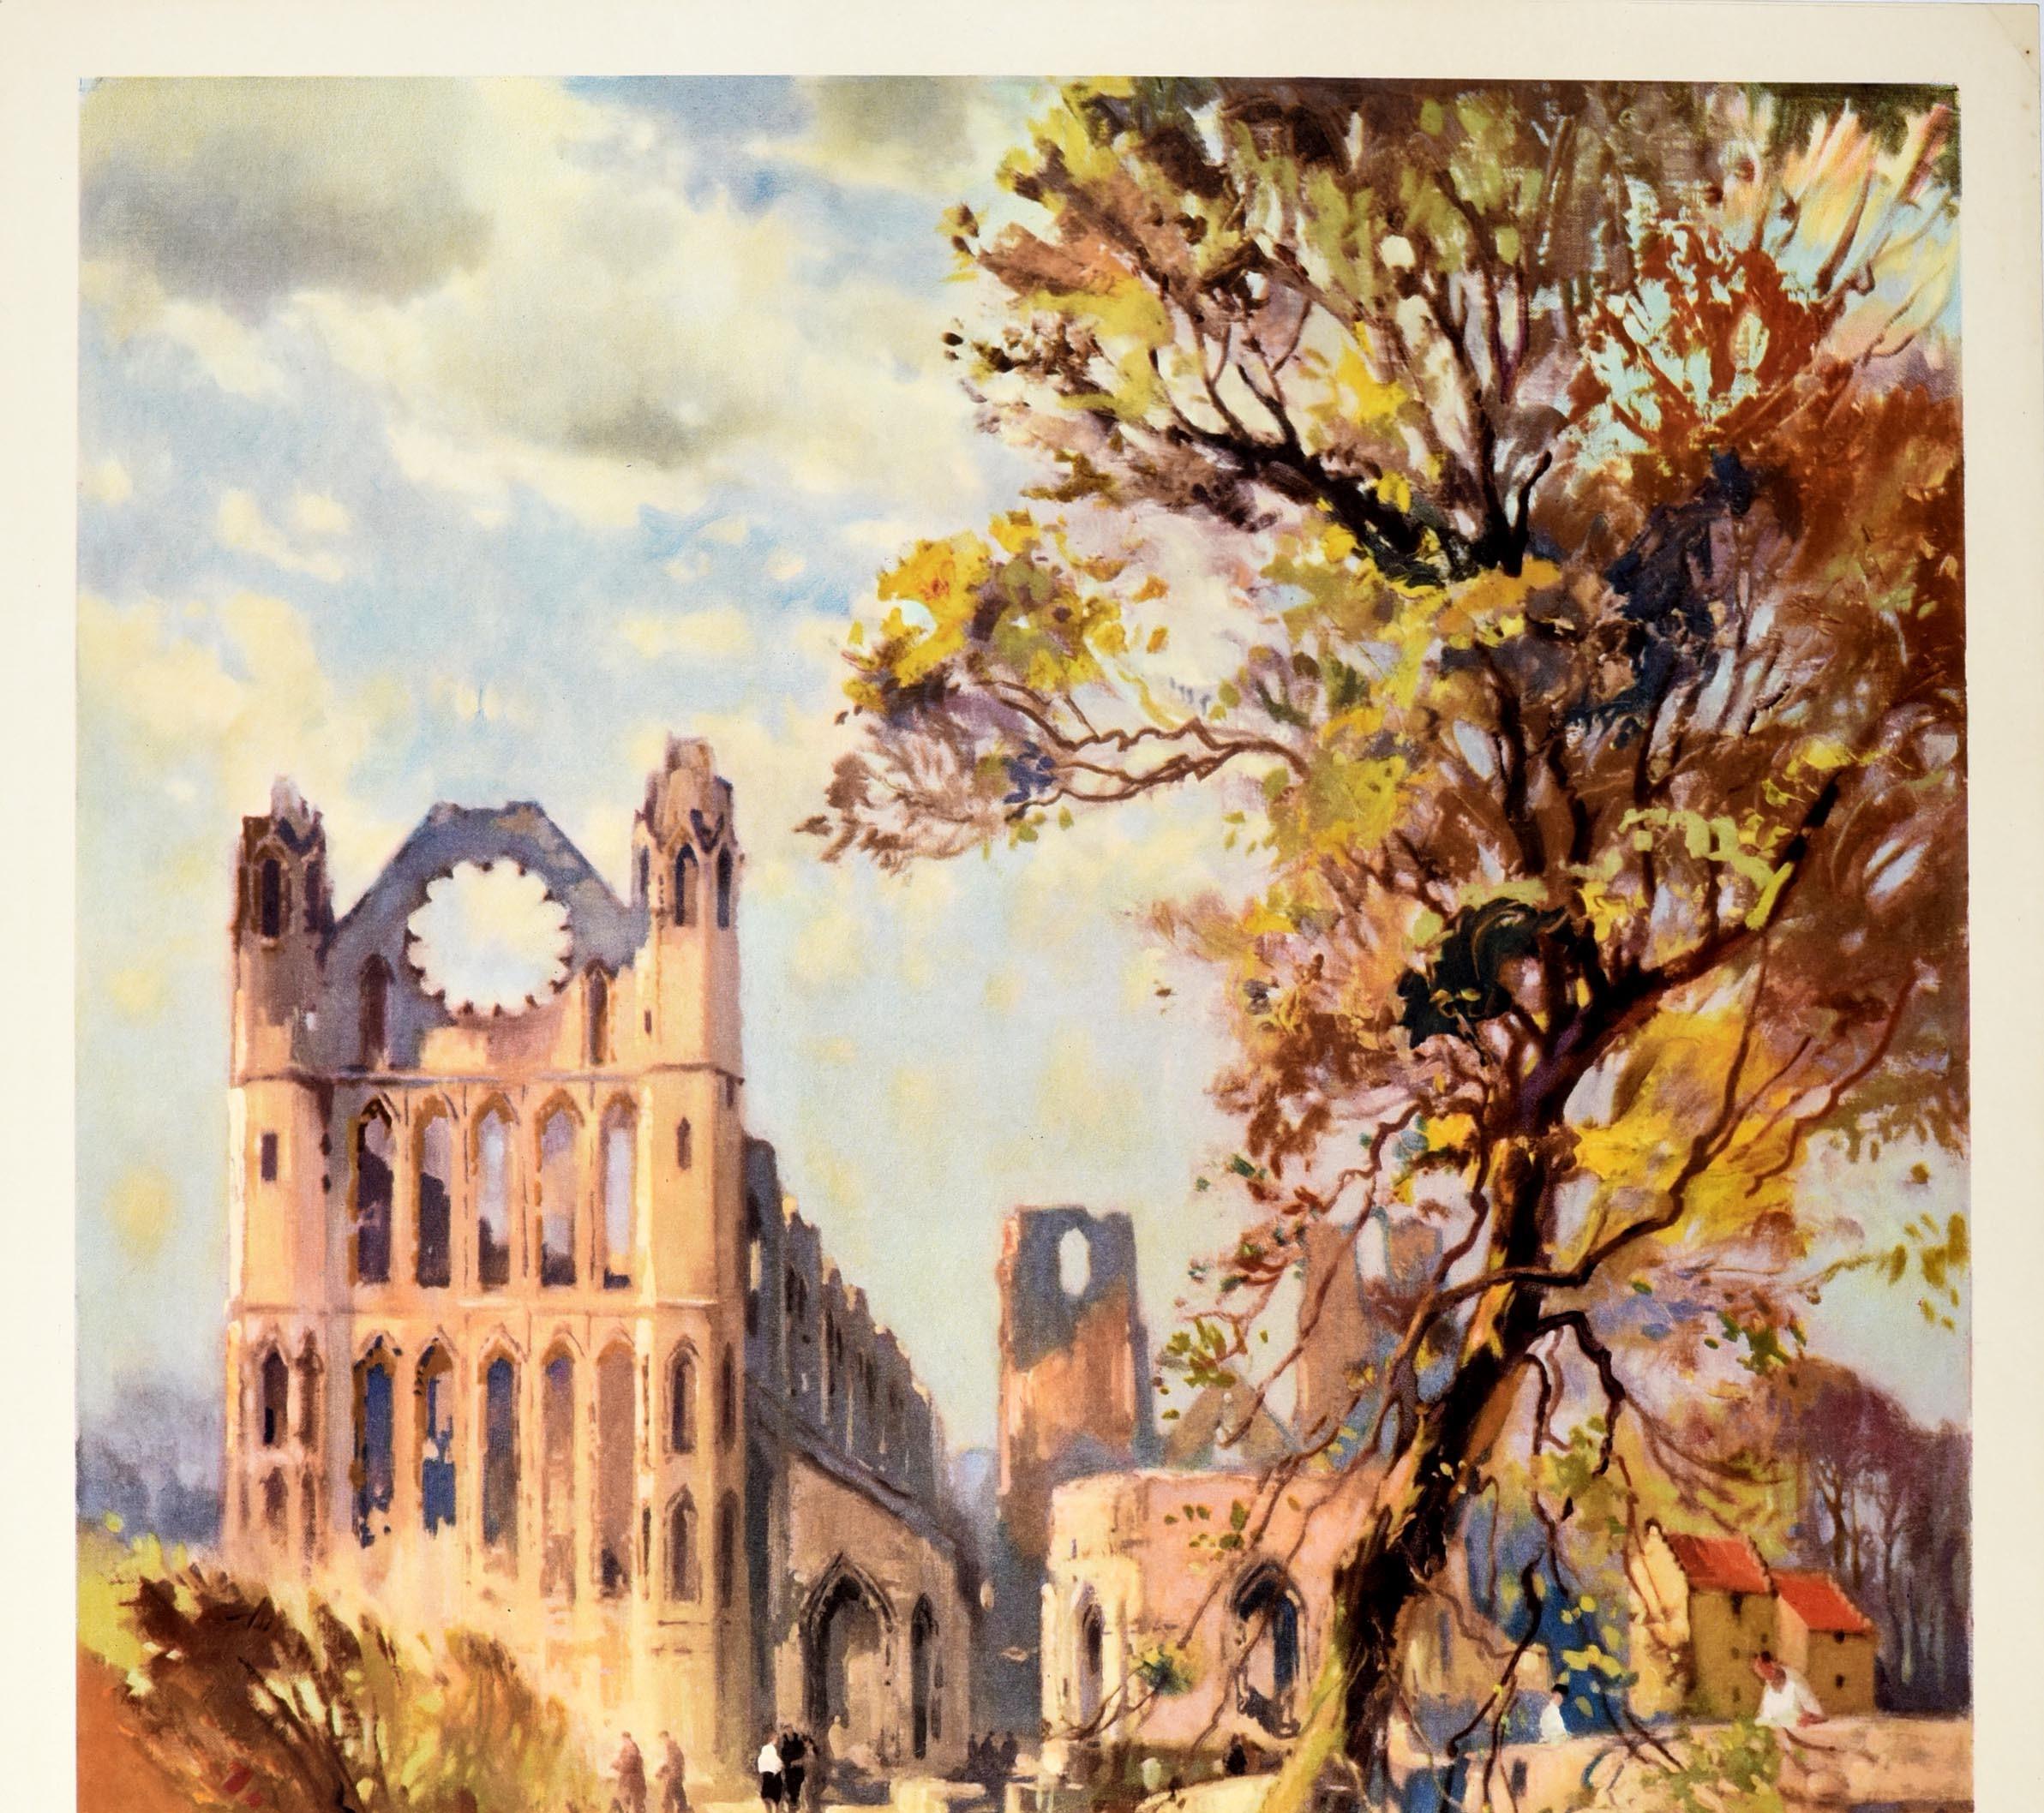 Original Vintage travel poster for Elgin Cathedral This famous old Cathedral in north east Scotland dates from 1224 A.D. See Scotland by Train British Railways. Great artwork by Jack Merriott (1901-1968) of the historic Elgin Cathedral ruins viewed